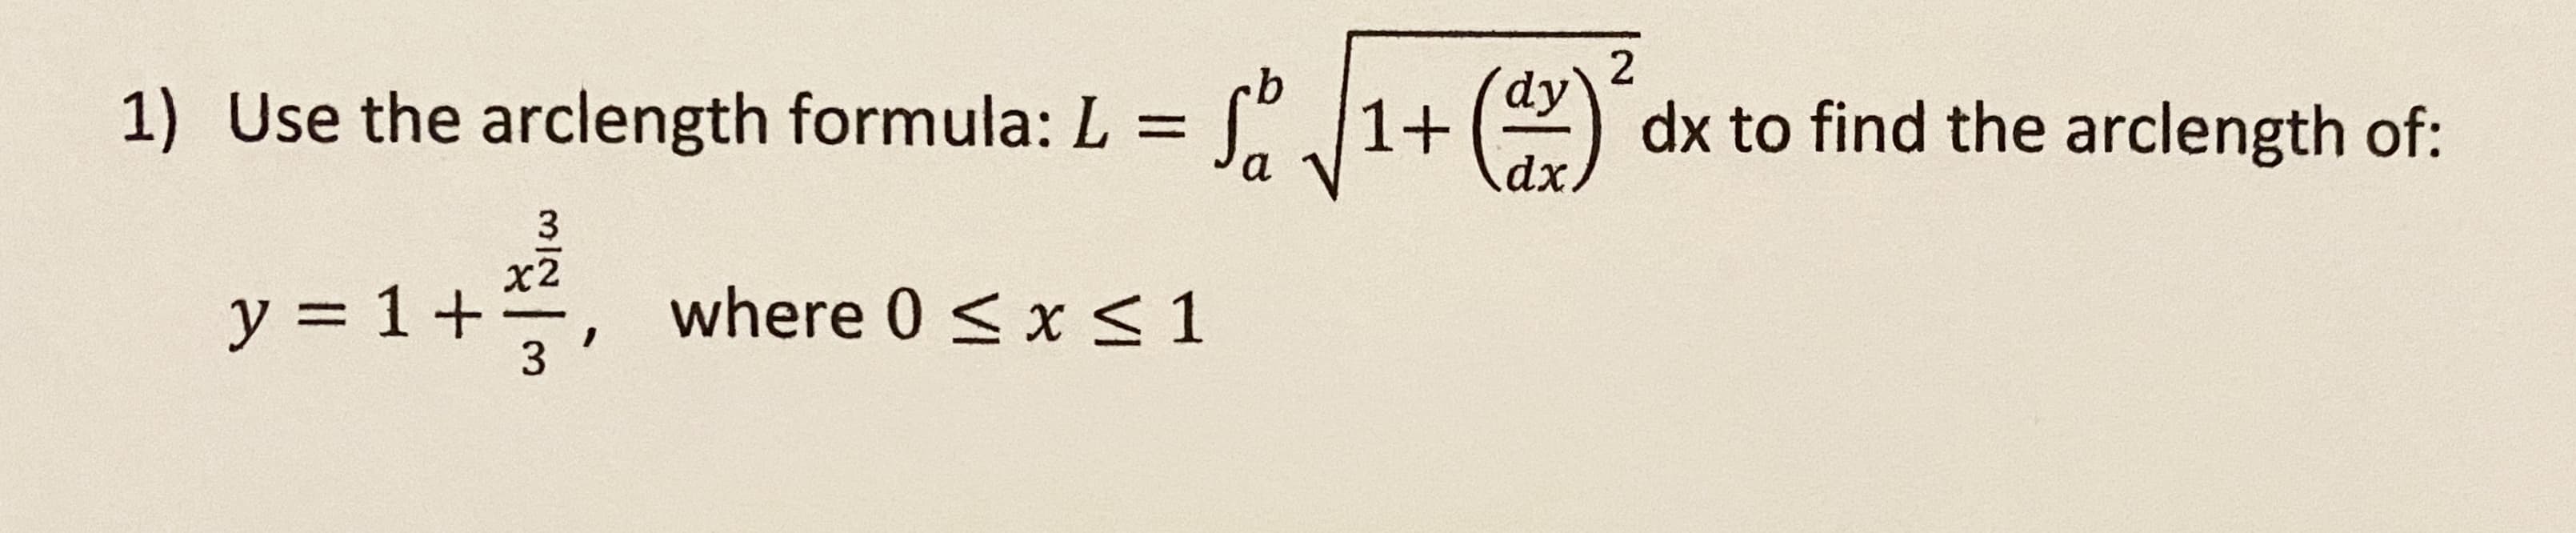 2
(dy
Use the arclength formula: L =
S.1+ () dx to find the arclength of:
y = 1+, where 0 <x < 1
х2
3
2.
